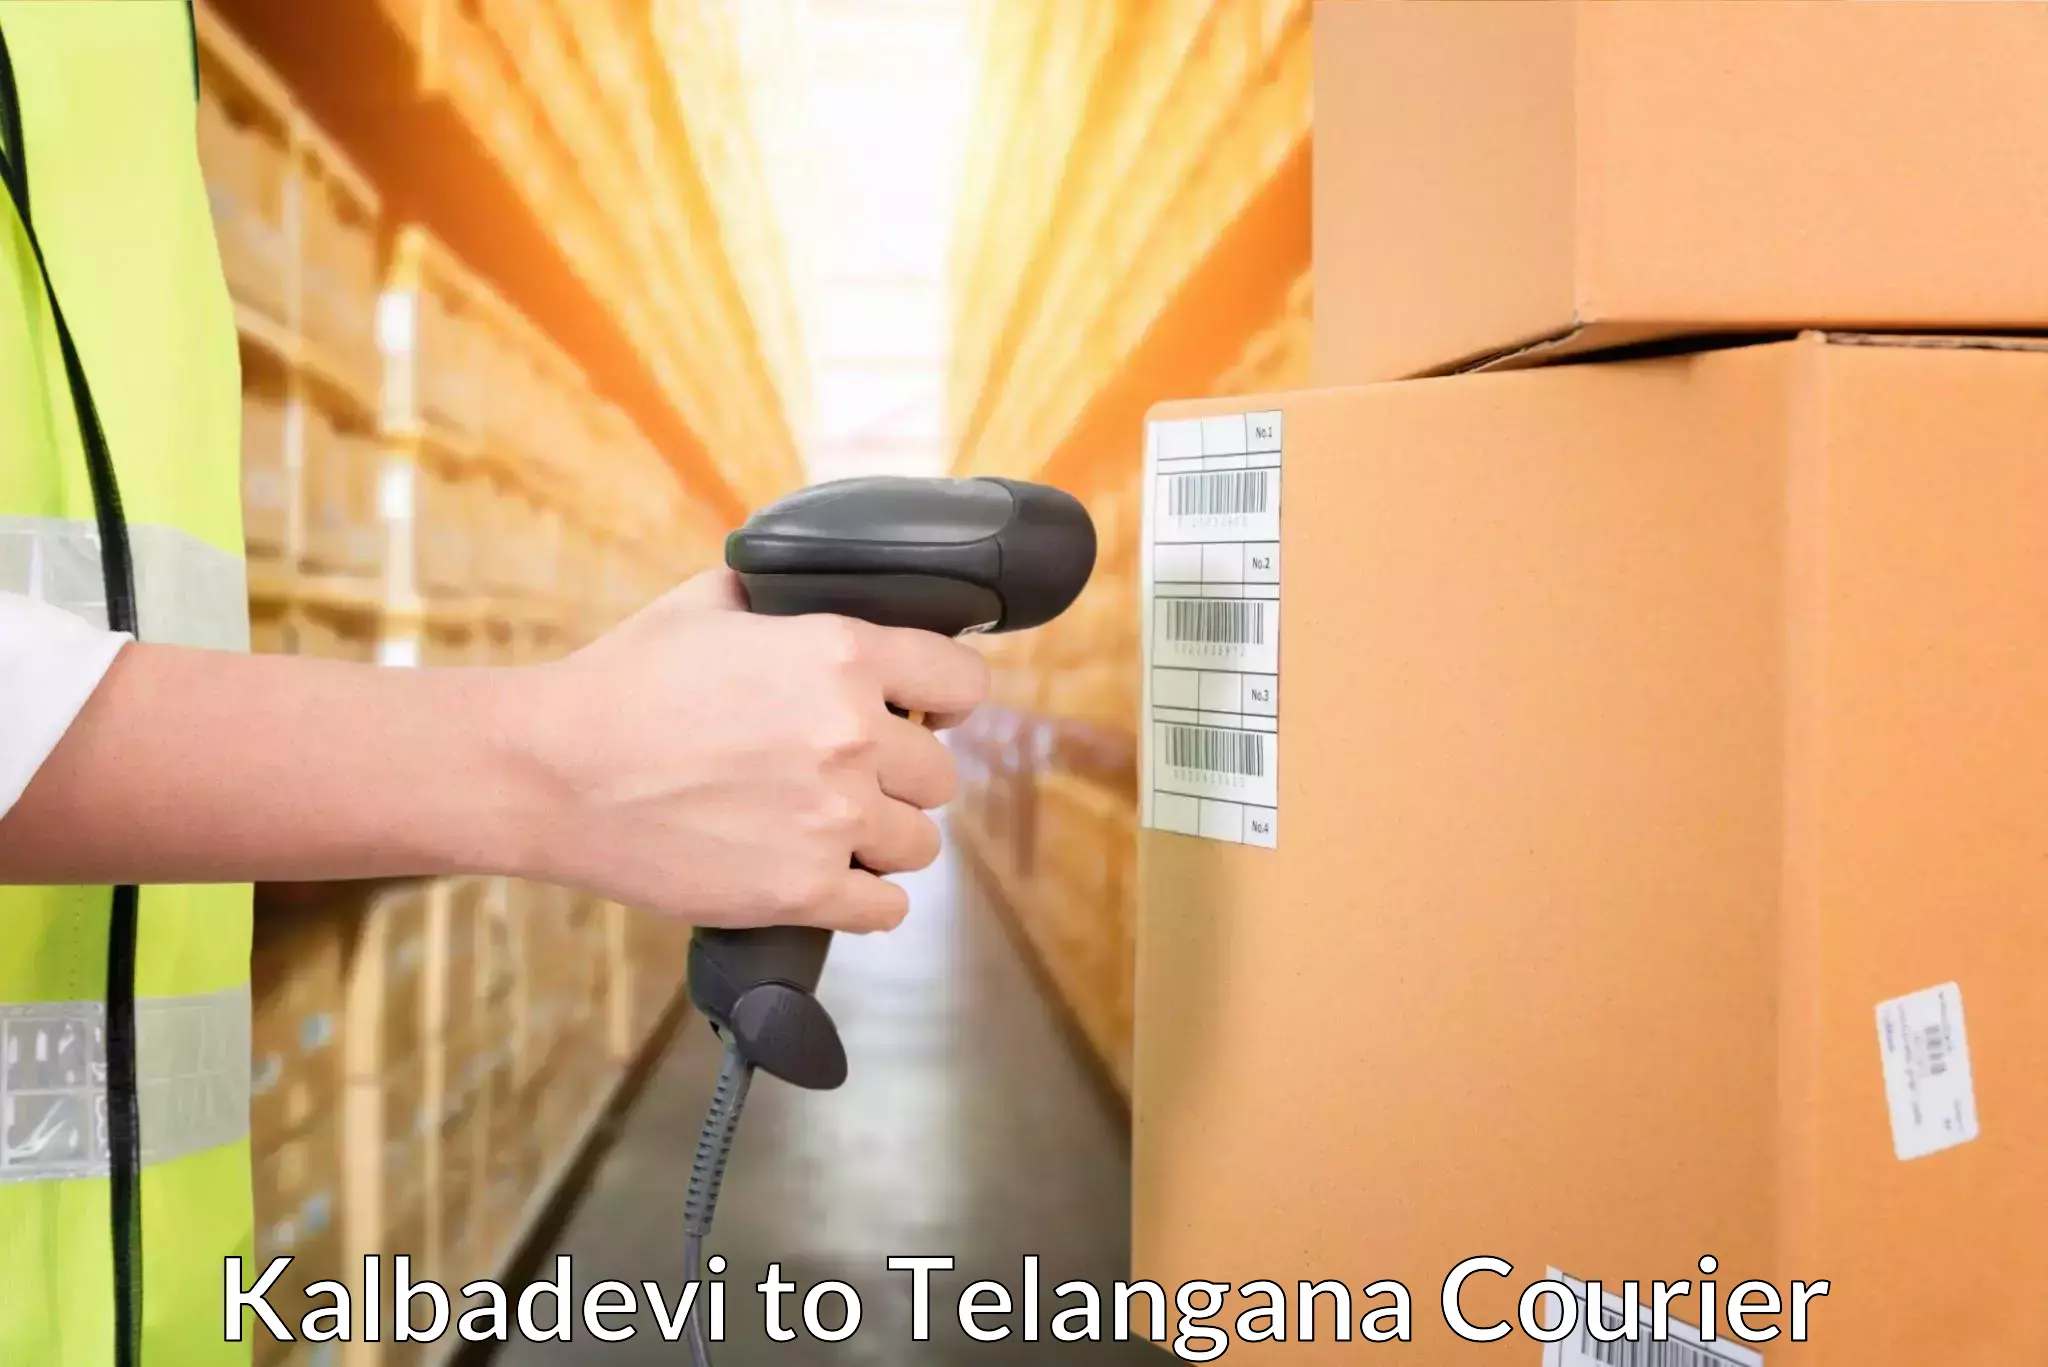 Tech-enabled shipping Kalbadevi to Bhadrachalam